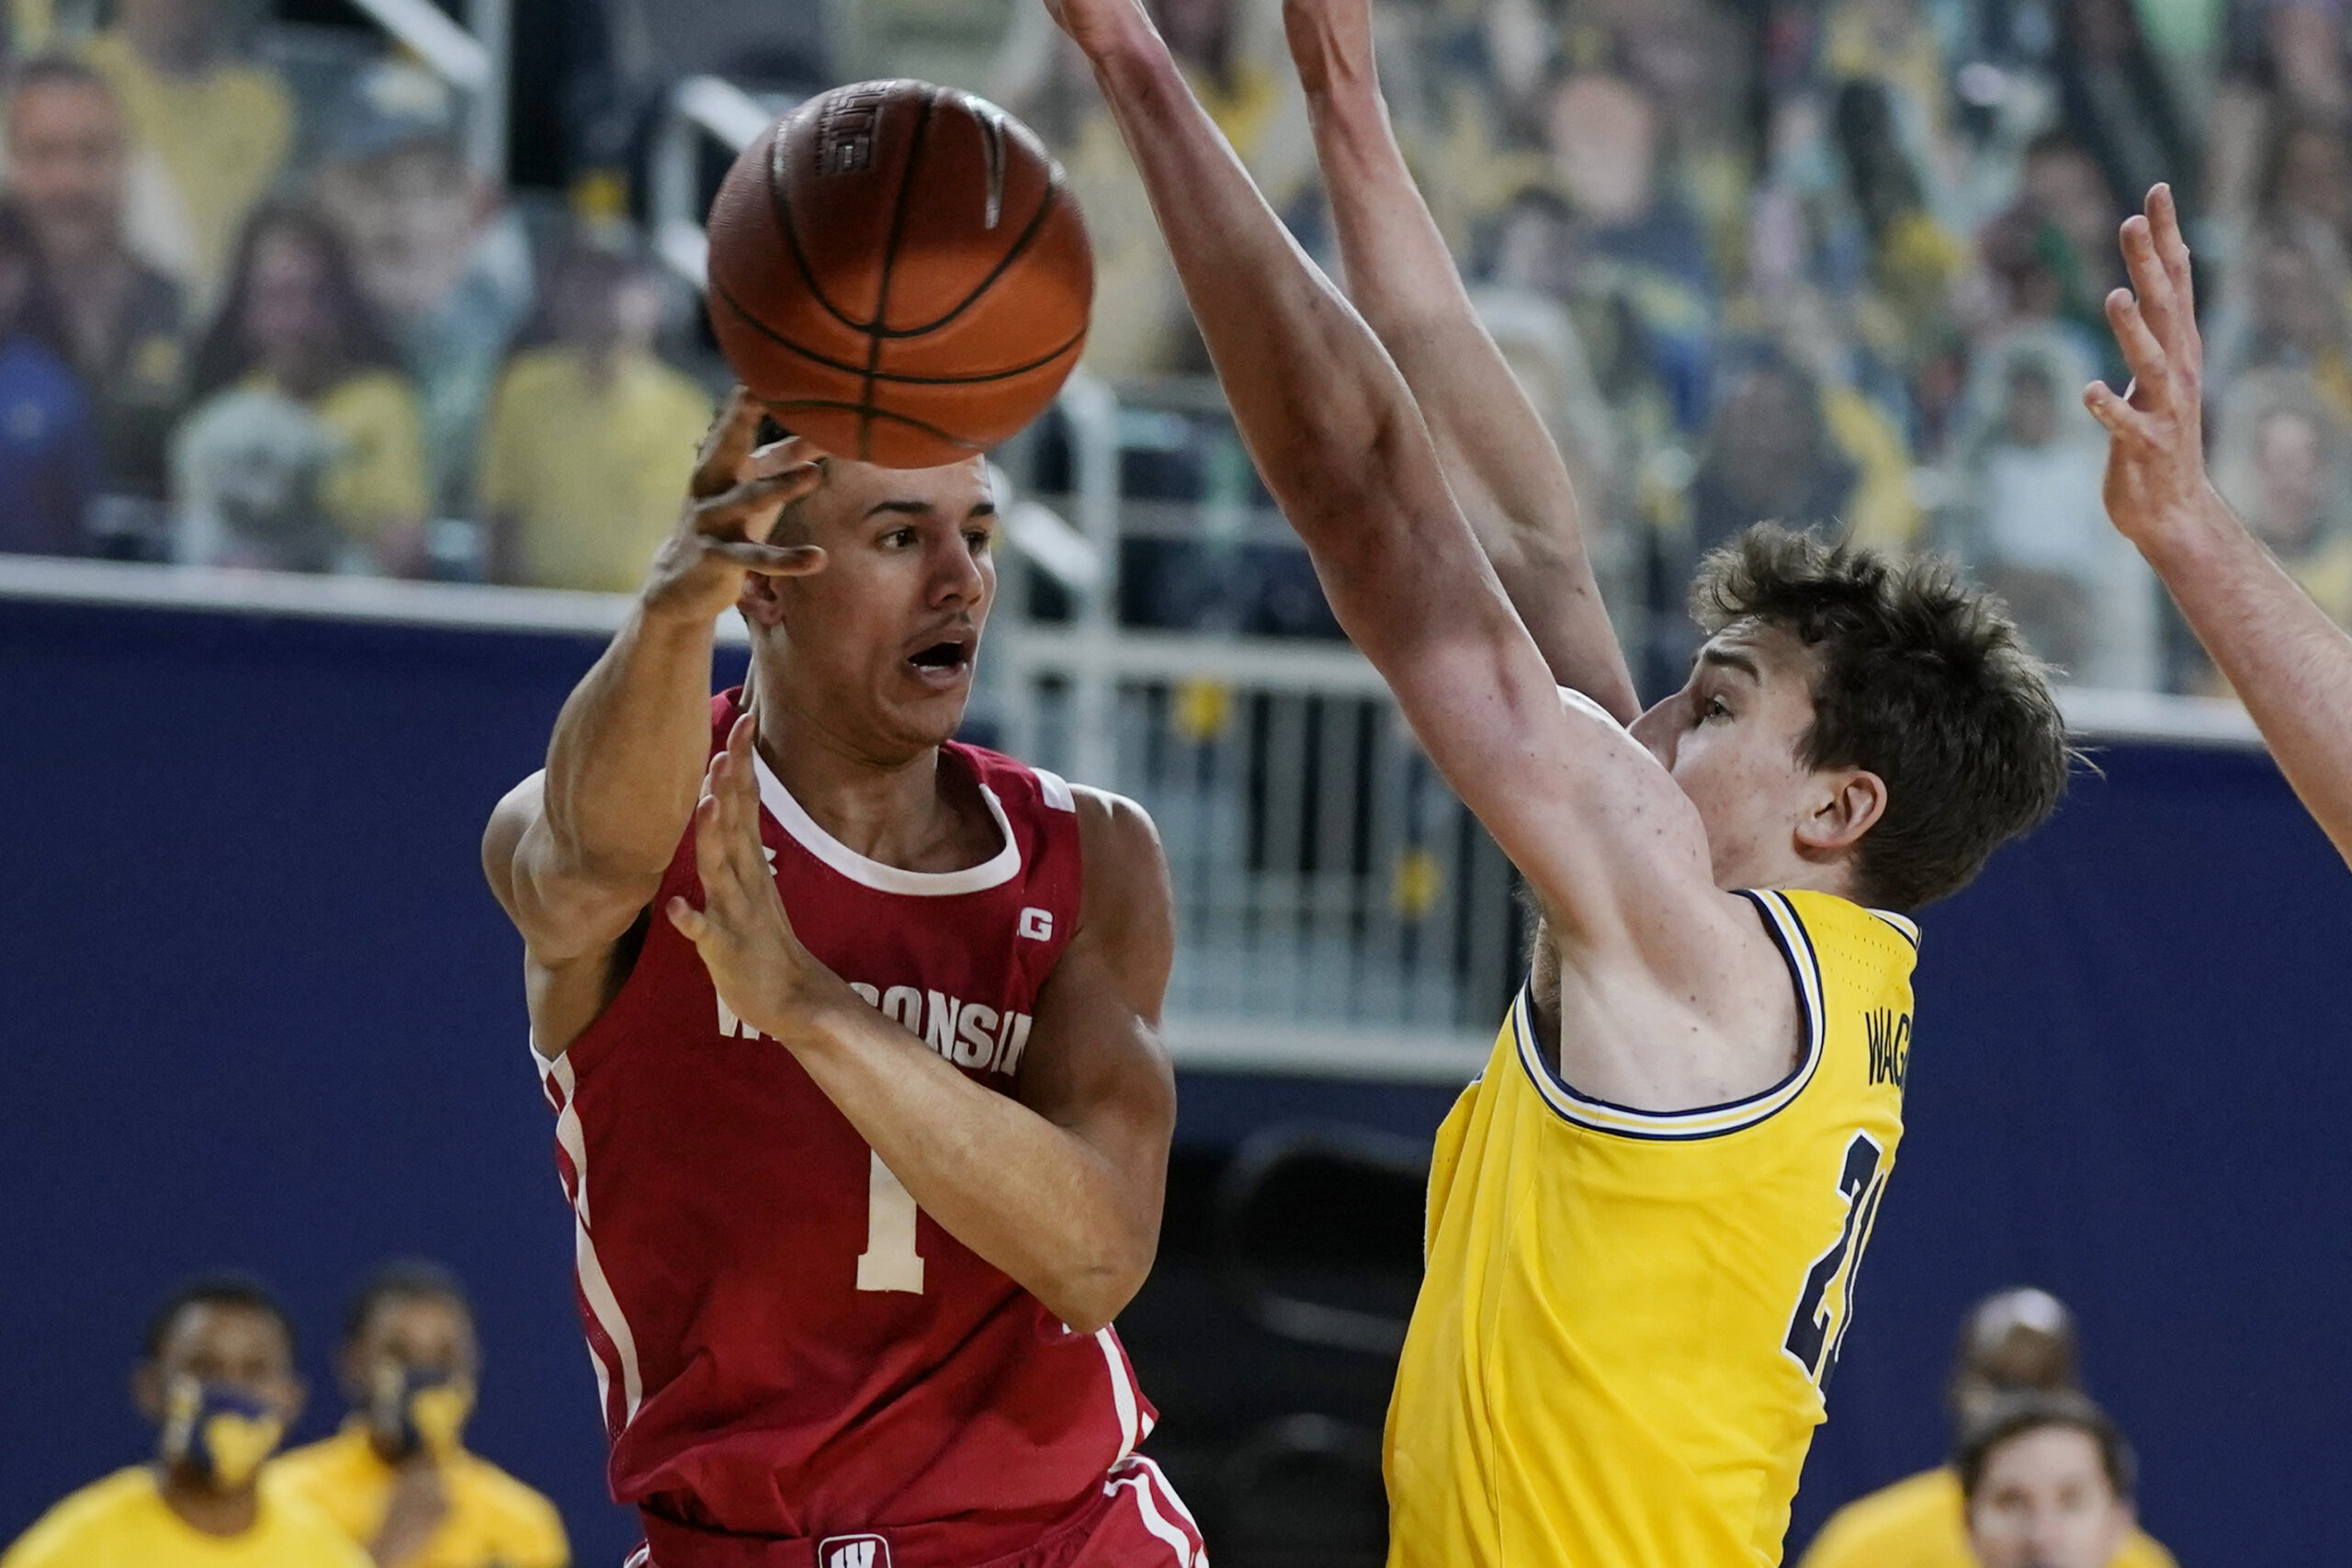 Badgers head into tourney losing last nine to ranked opponents — but N.C. isn’t ranked